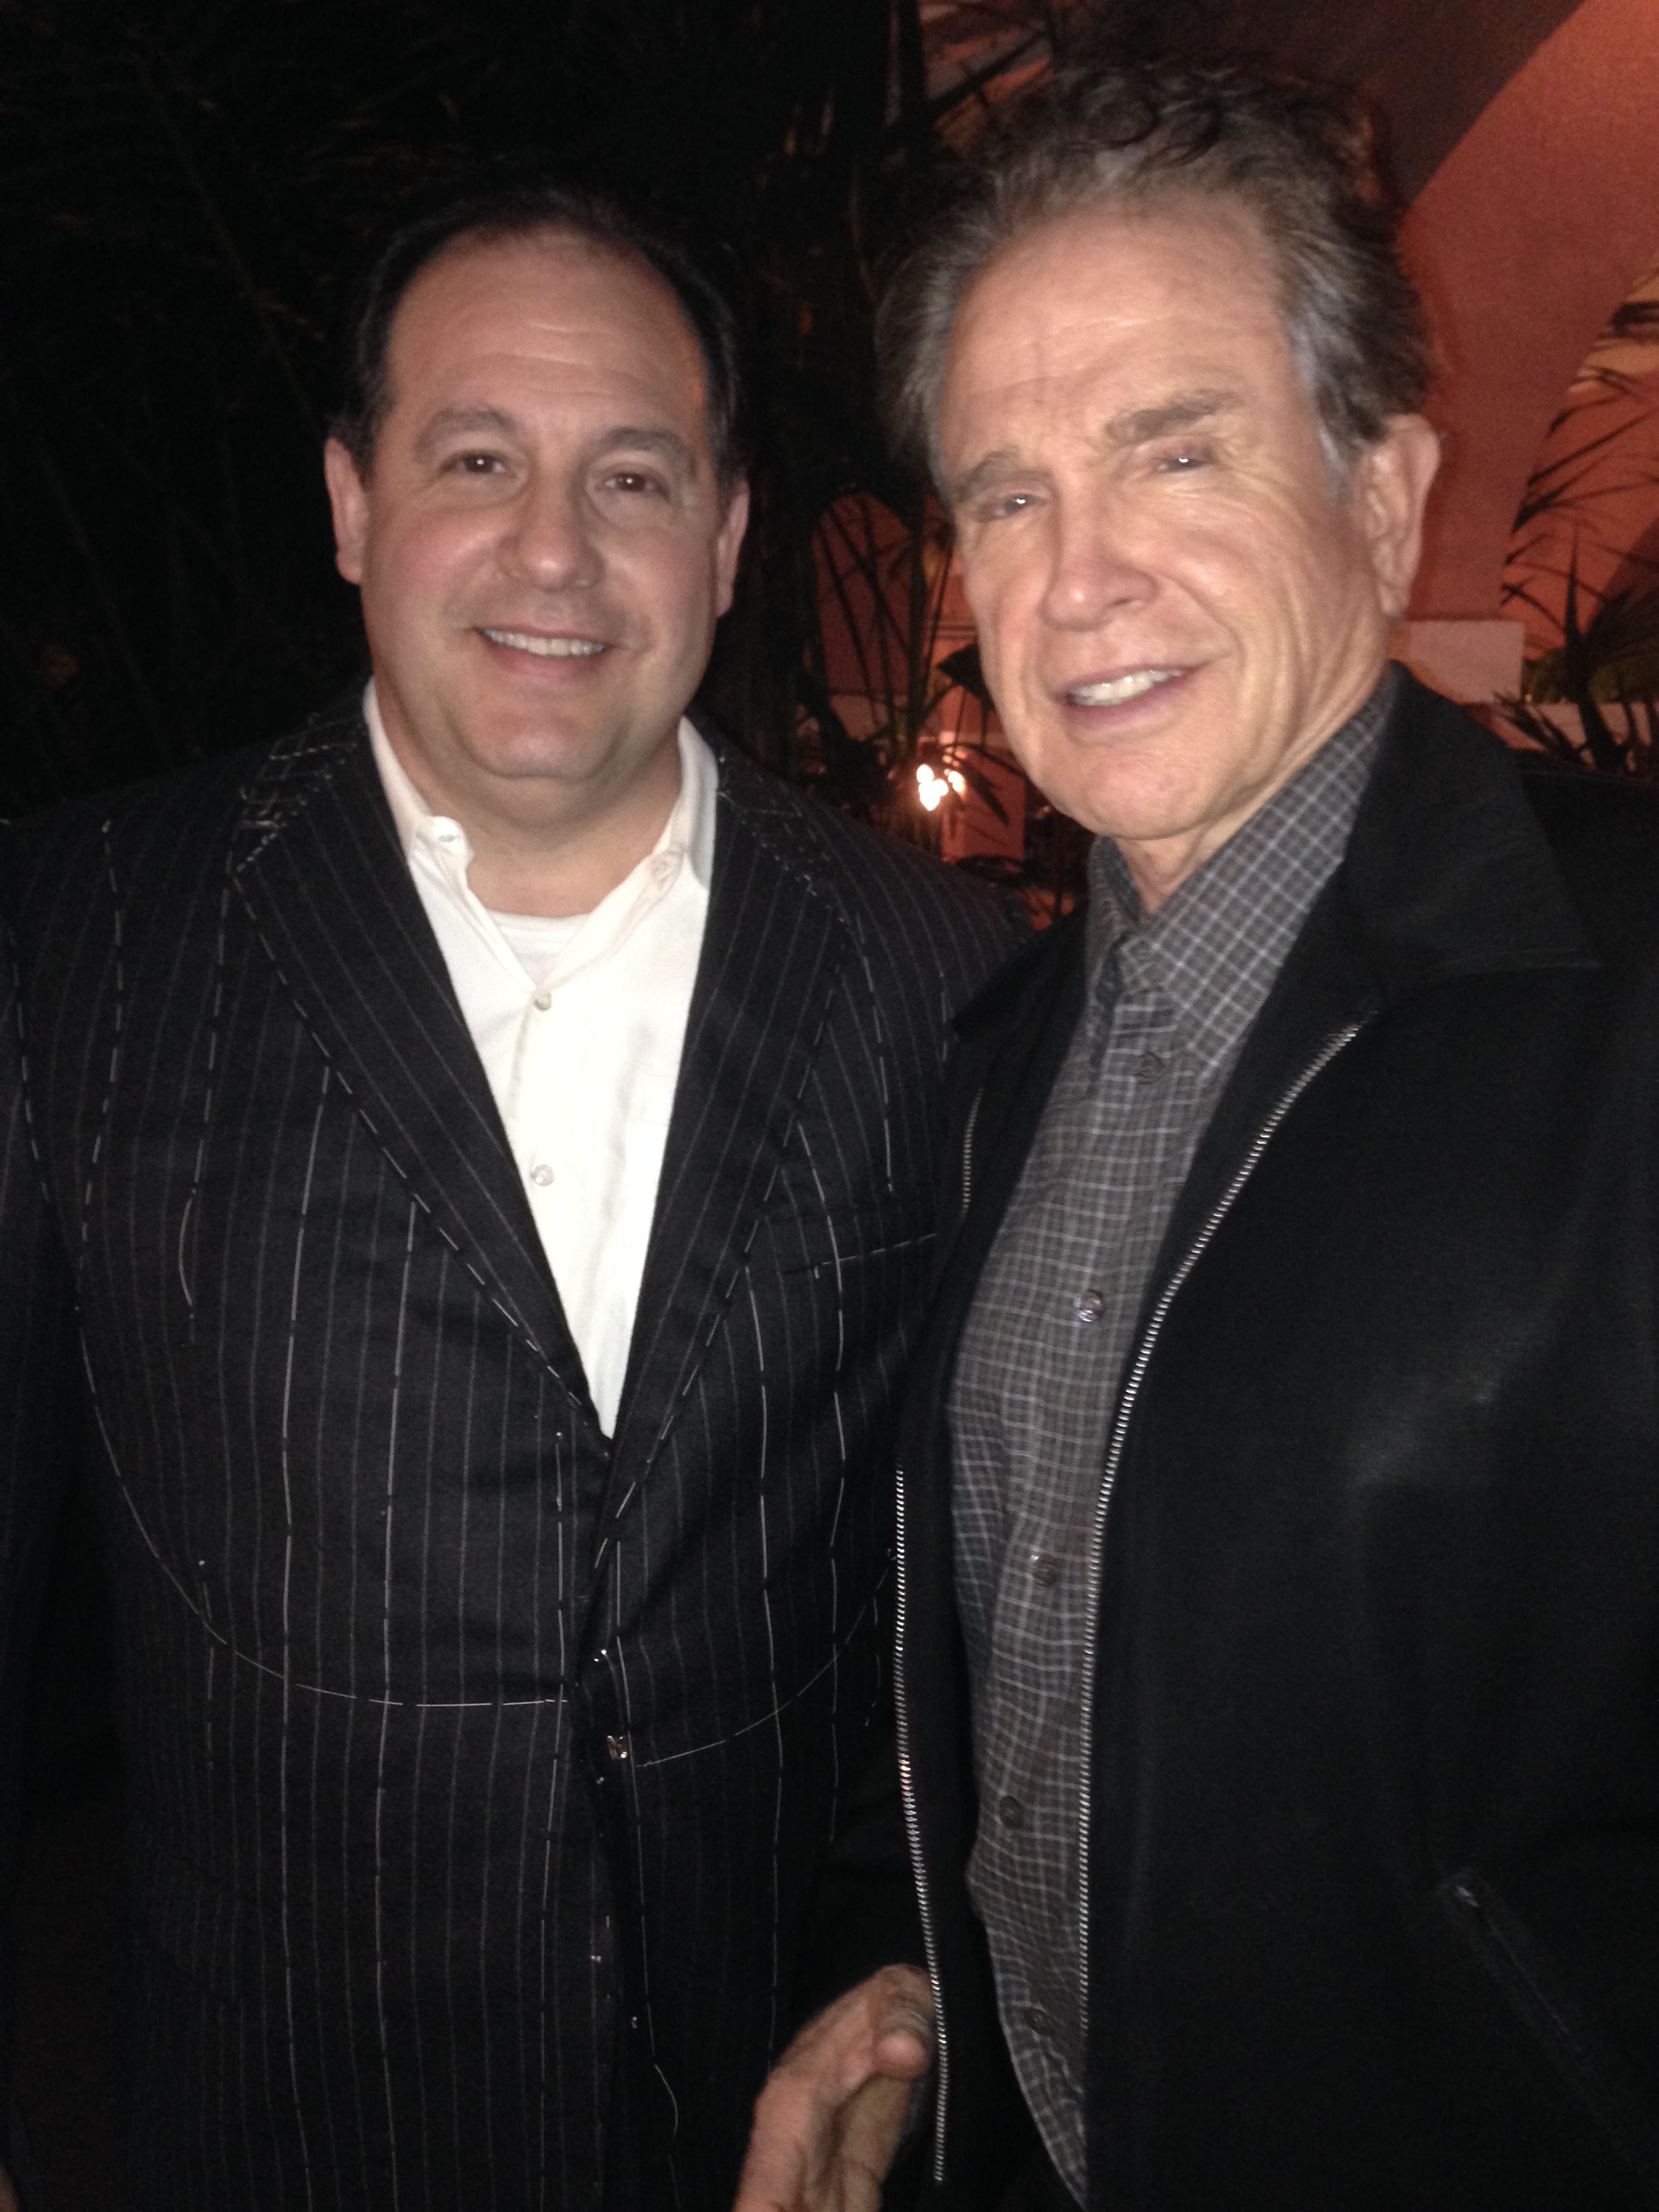 With Warren Beatty on set of his new movie, untitled as of now. Great to be directed by him!